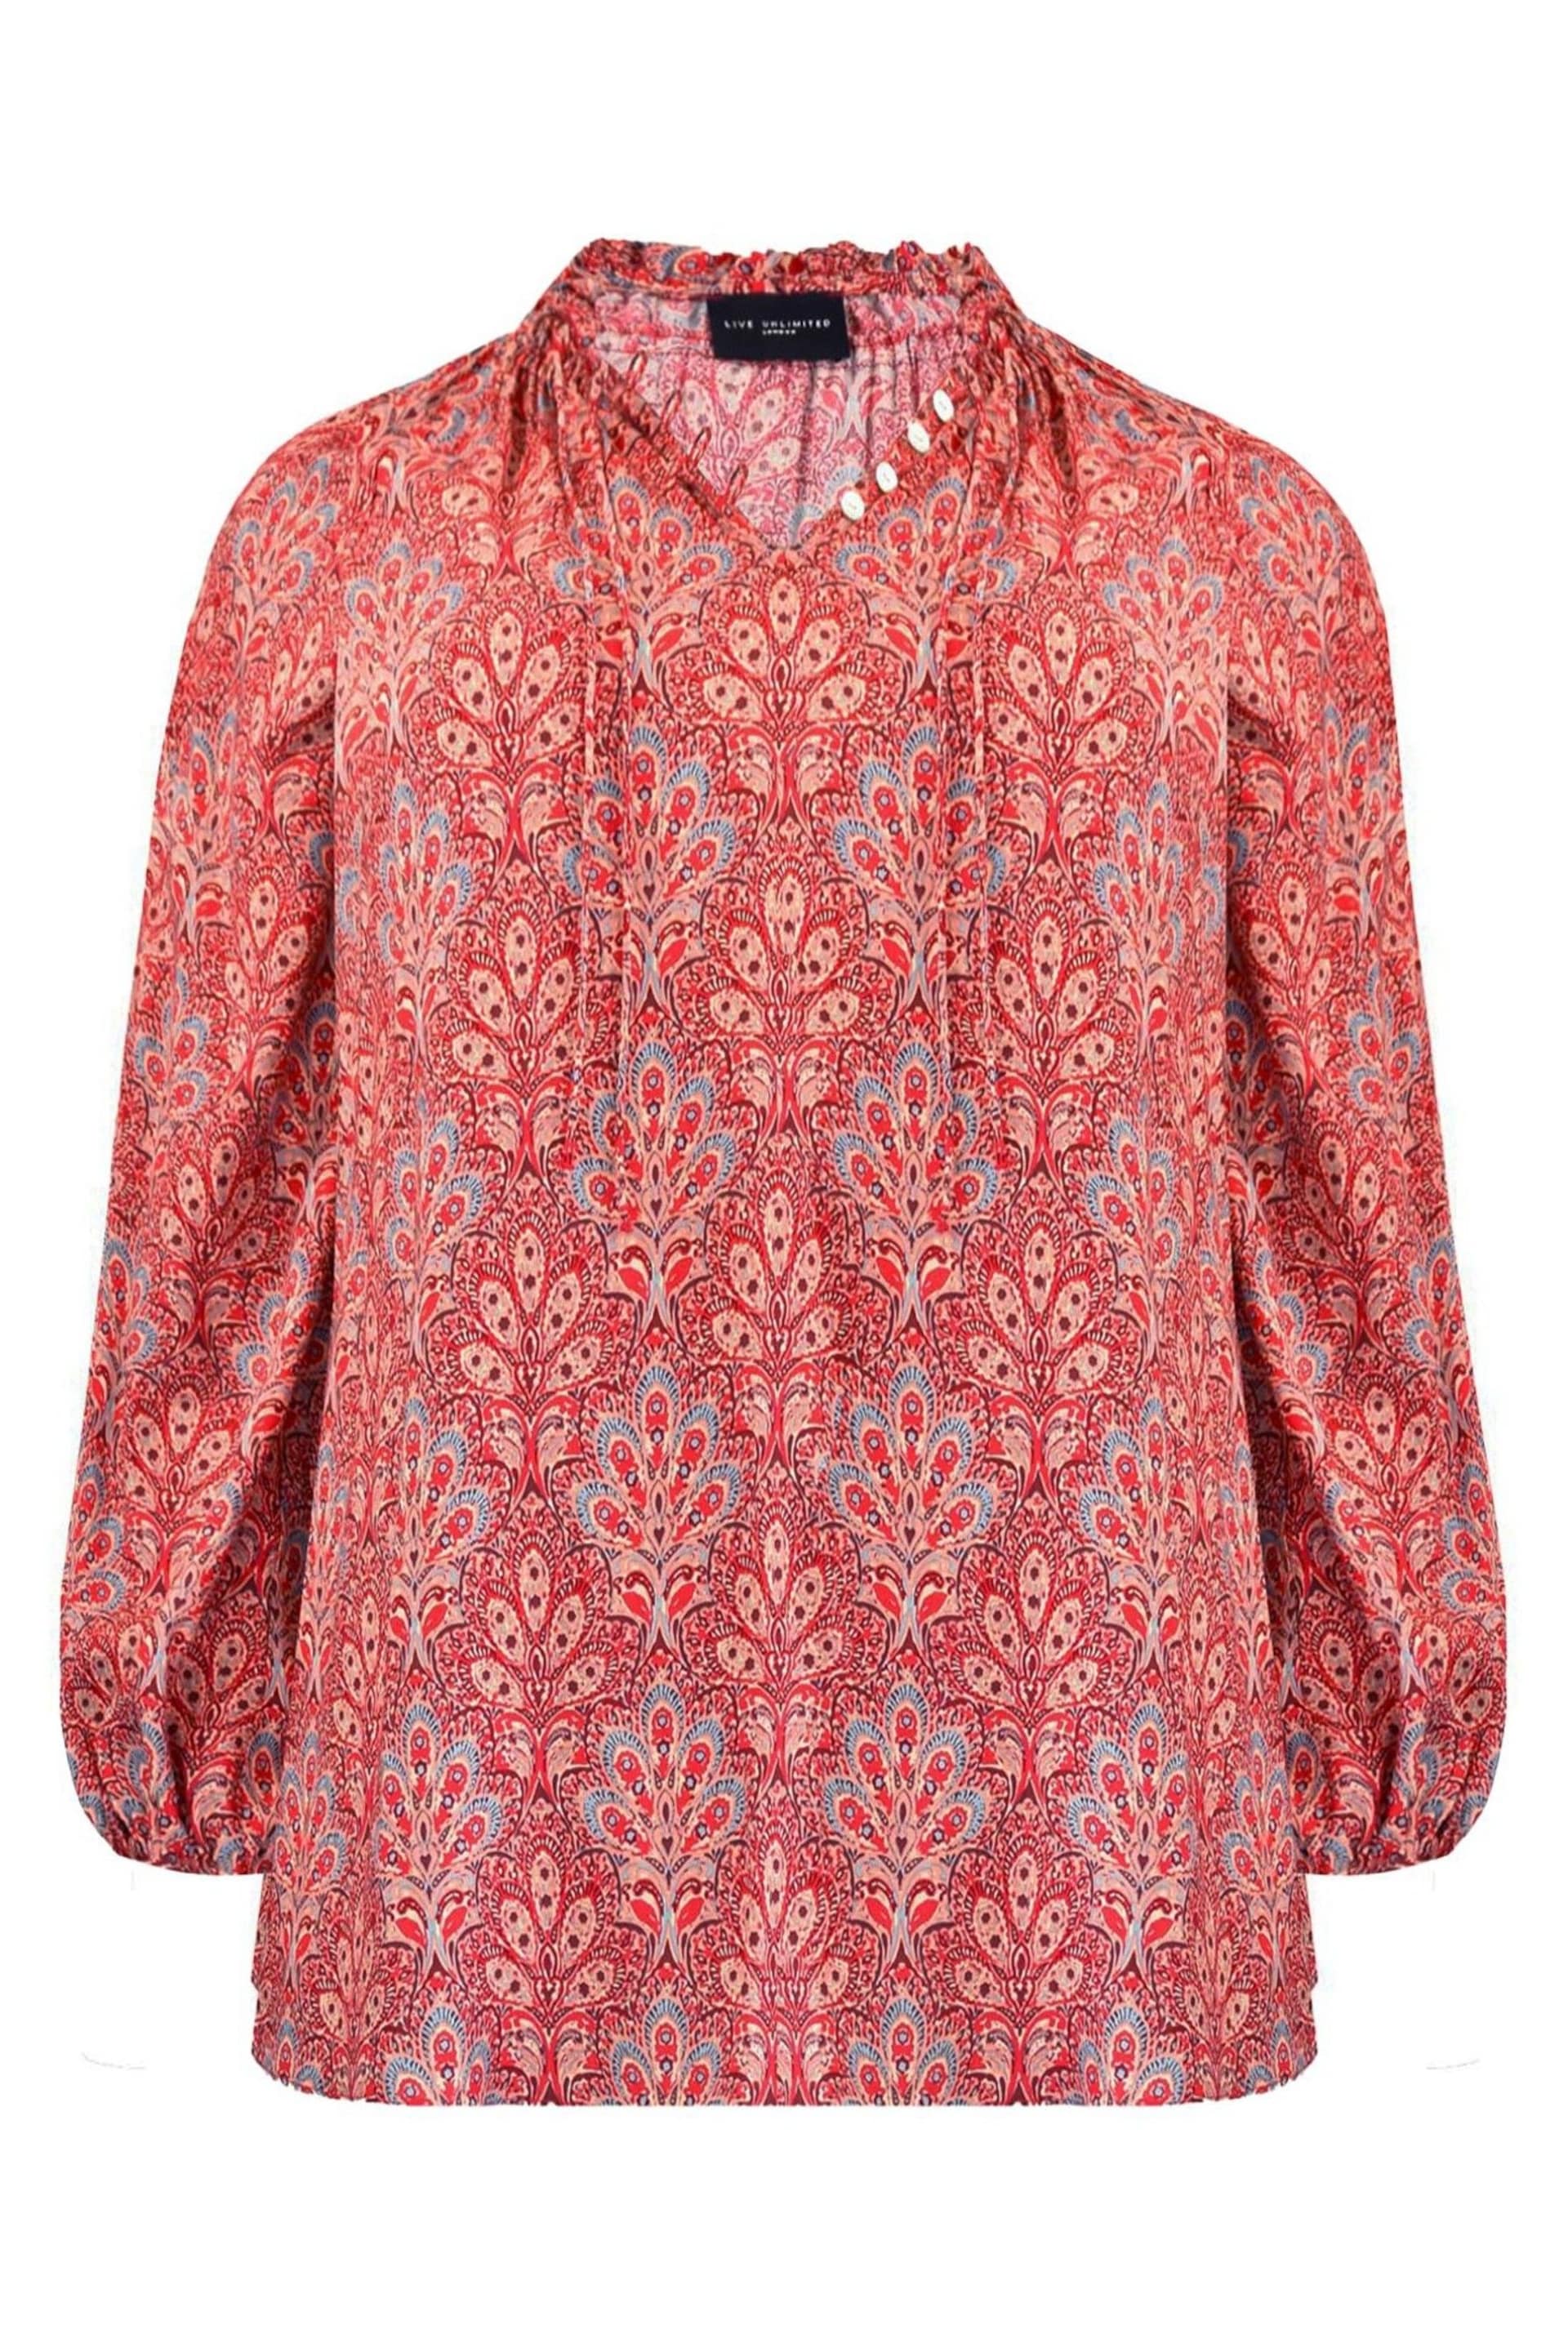 Live Unlimited Red Paisley Print Shirred Neck Blouse - Image 6 of 7